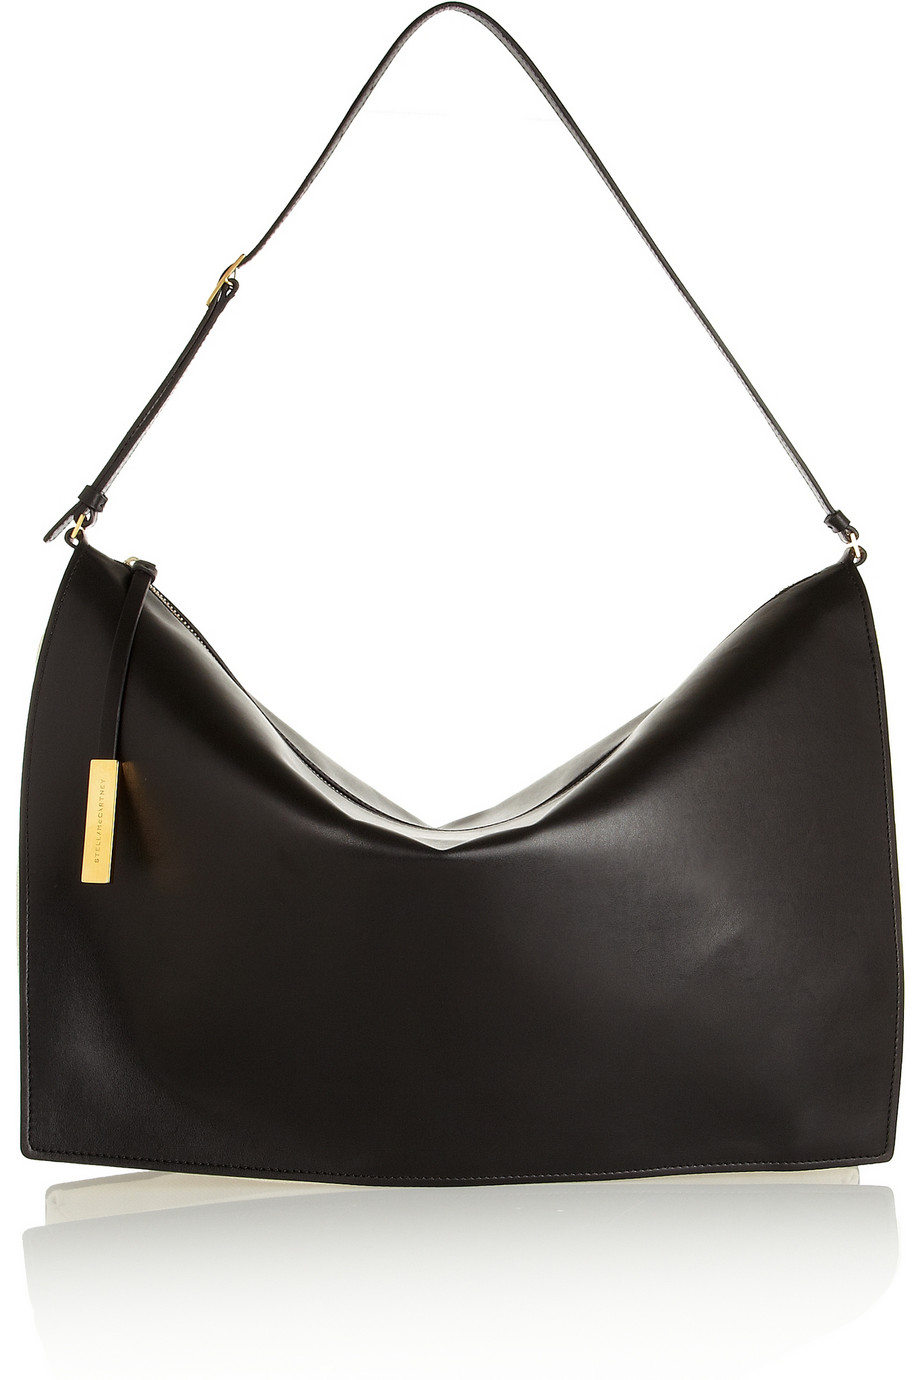 Lyst - Stella Mccartney Beckett Faux Leather and Canvas Shoulder Bag in ...